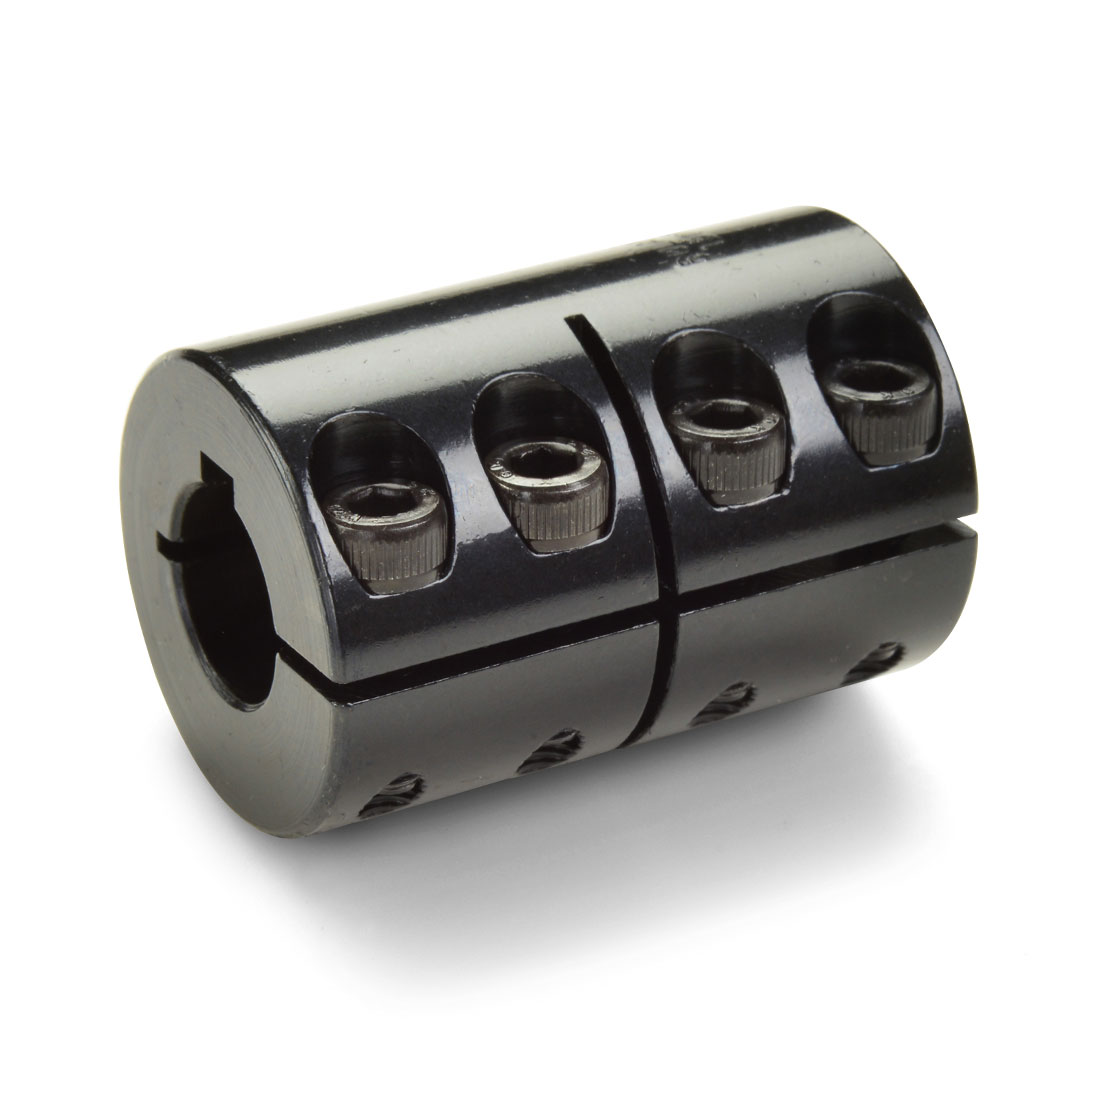 3-1/8 OD 2 Bore B Diameter 4-7/8 Length 1/2 x 1/2 Keyway Width Ruland CLC-32-32-F One-Piece Clamping Rigid Coupling with Keyway 2 Bore A Diameter Black Oxide Steel 